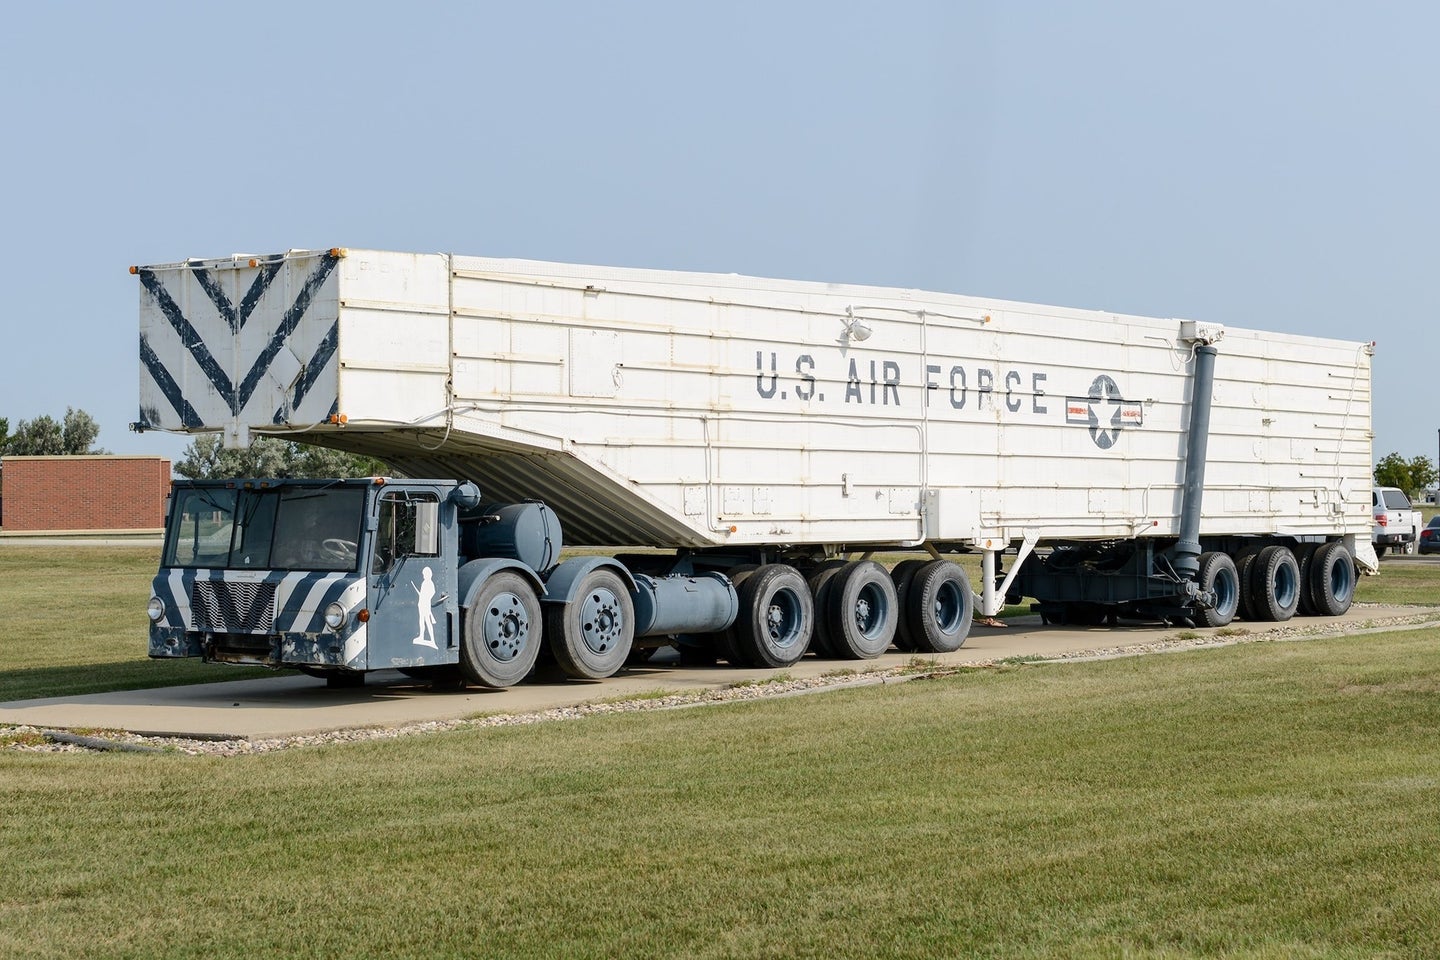 This vehicle, seen at  Minot Air Force Base, ND, can transport American ICBM missiles.